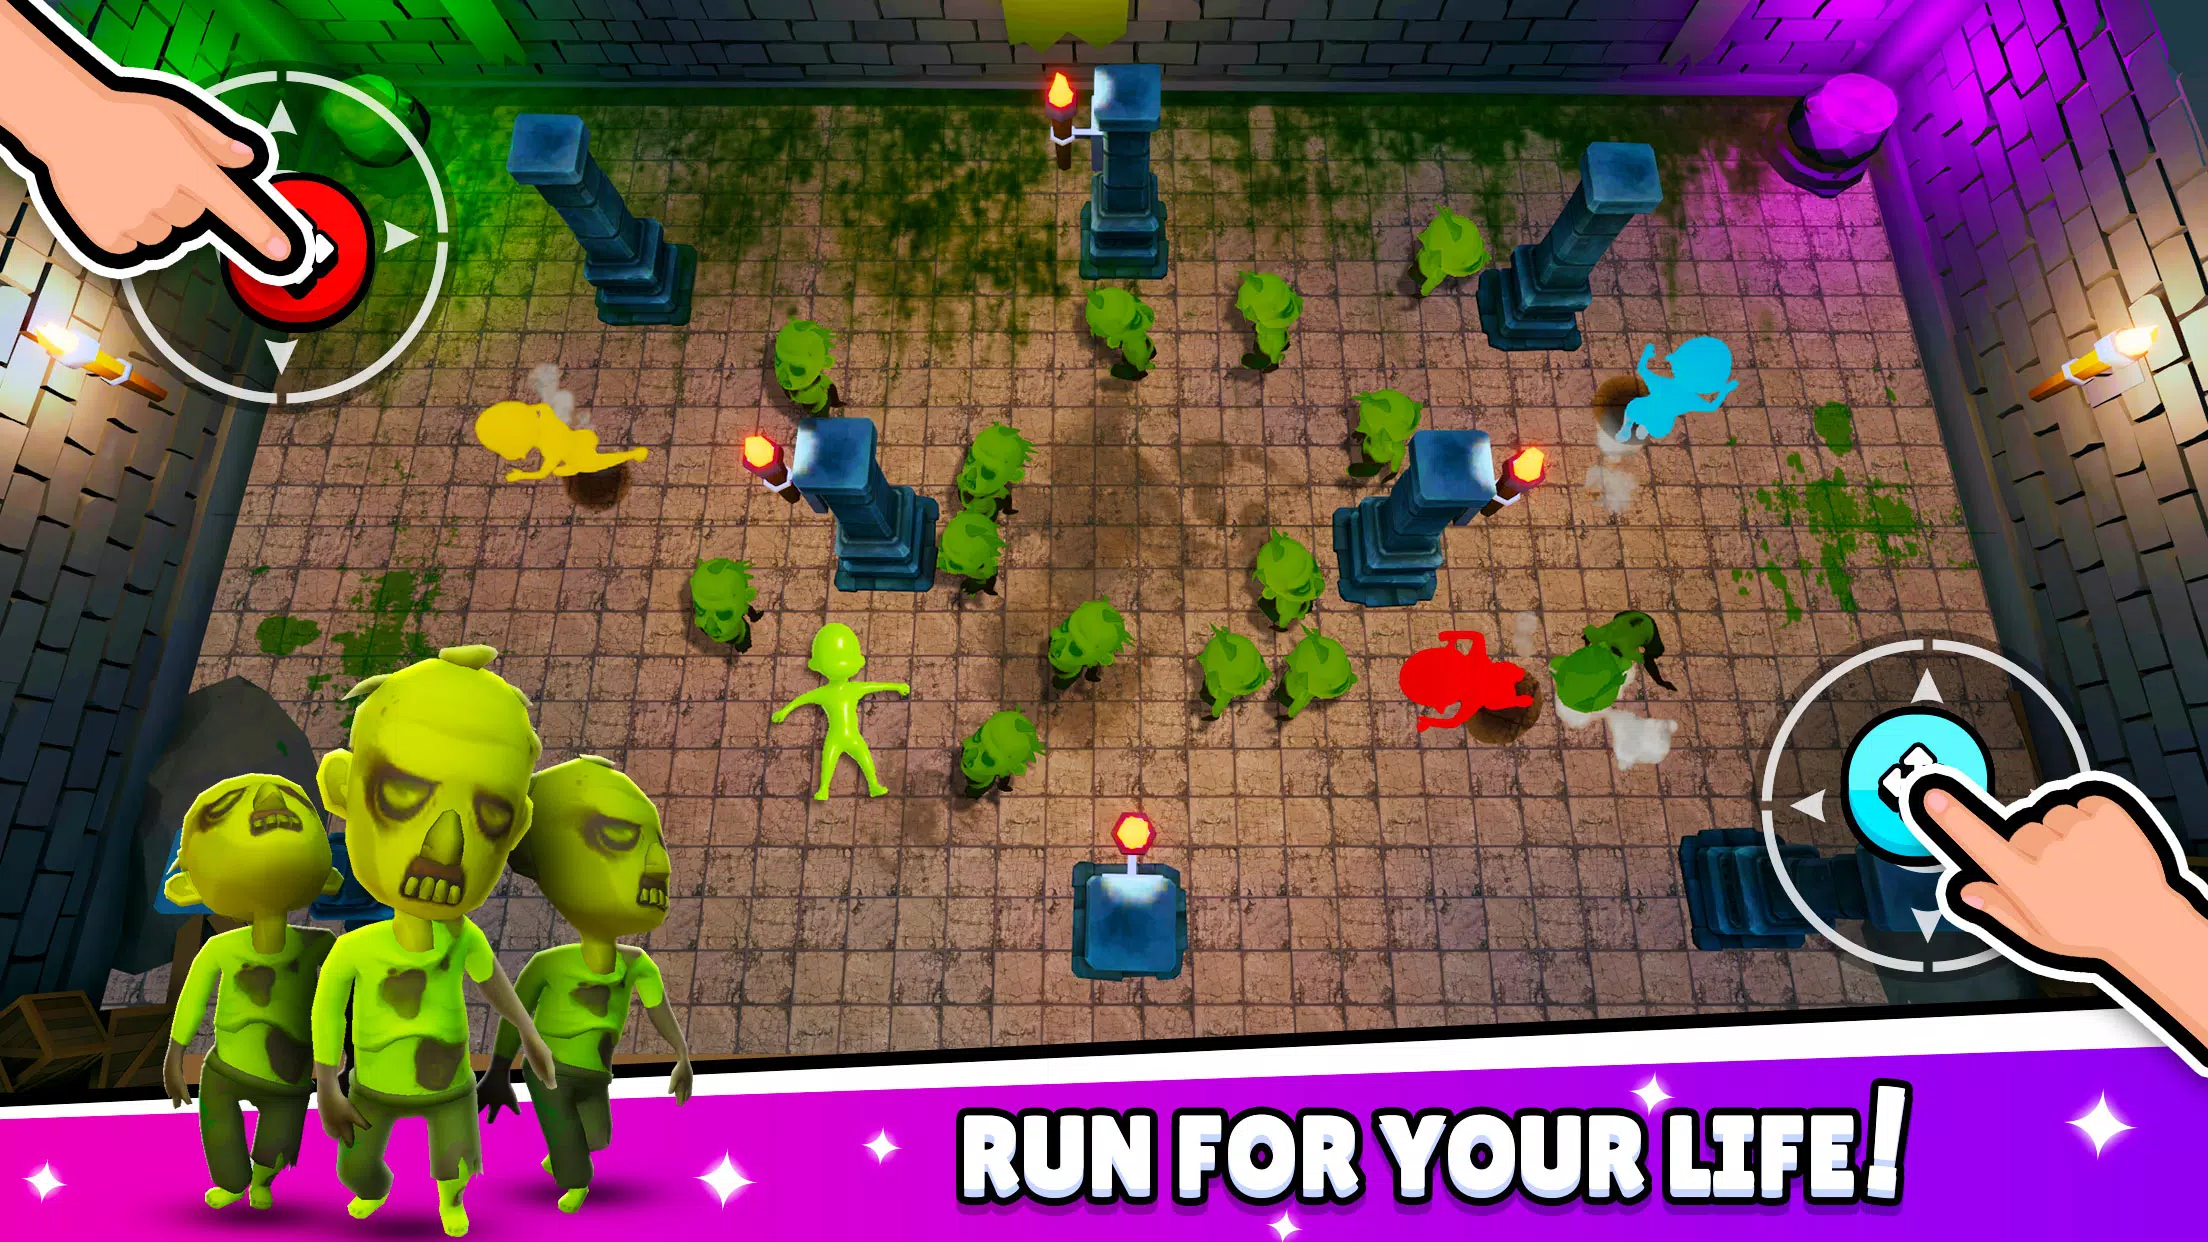 1 2 3 4 Player Games - Offline 2.1.9 APK + Mod for Android.